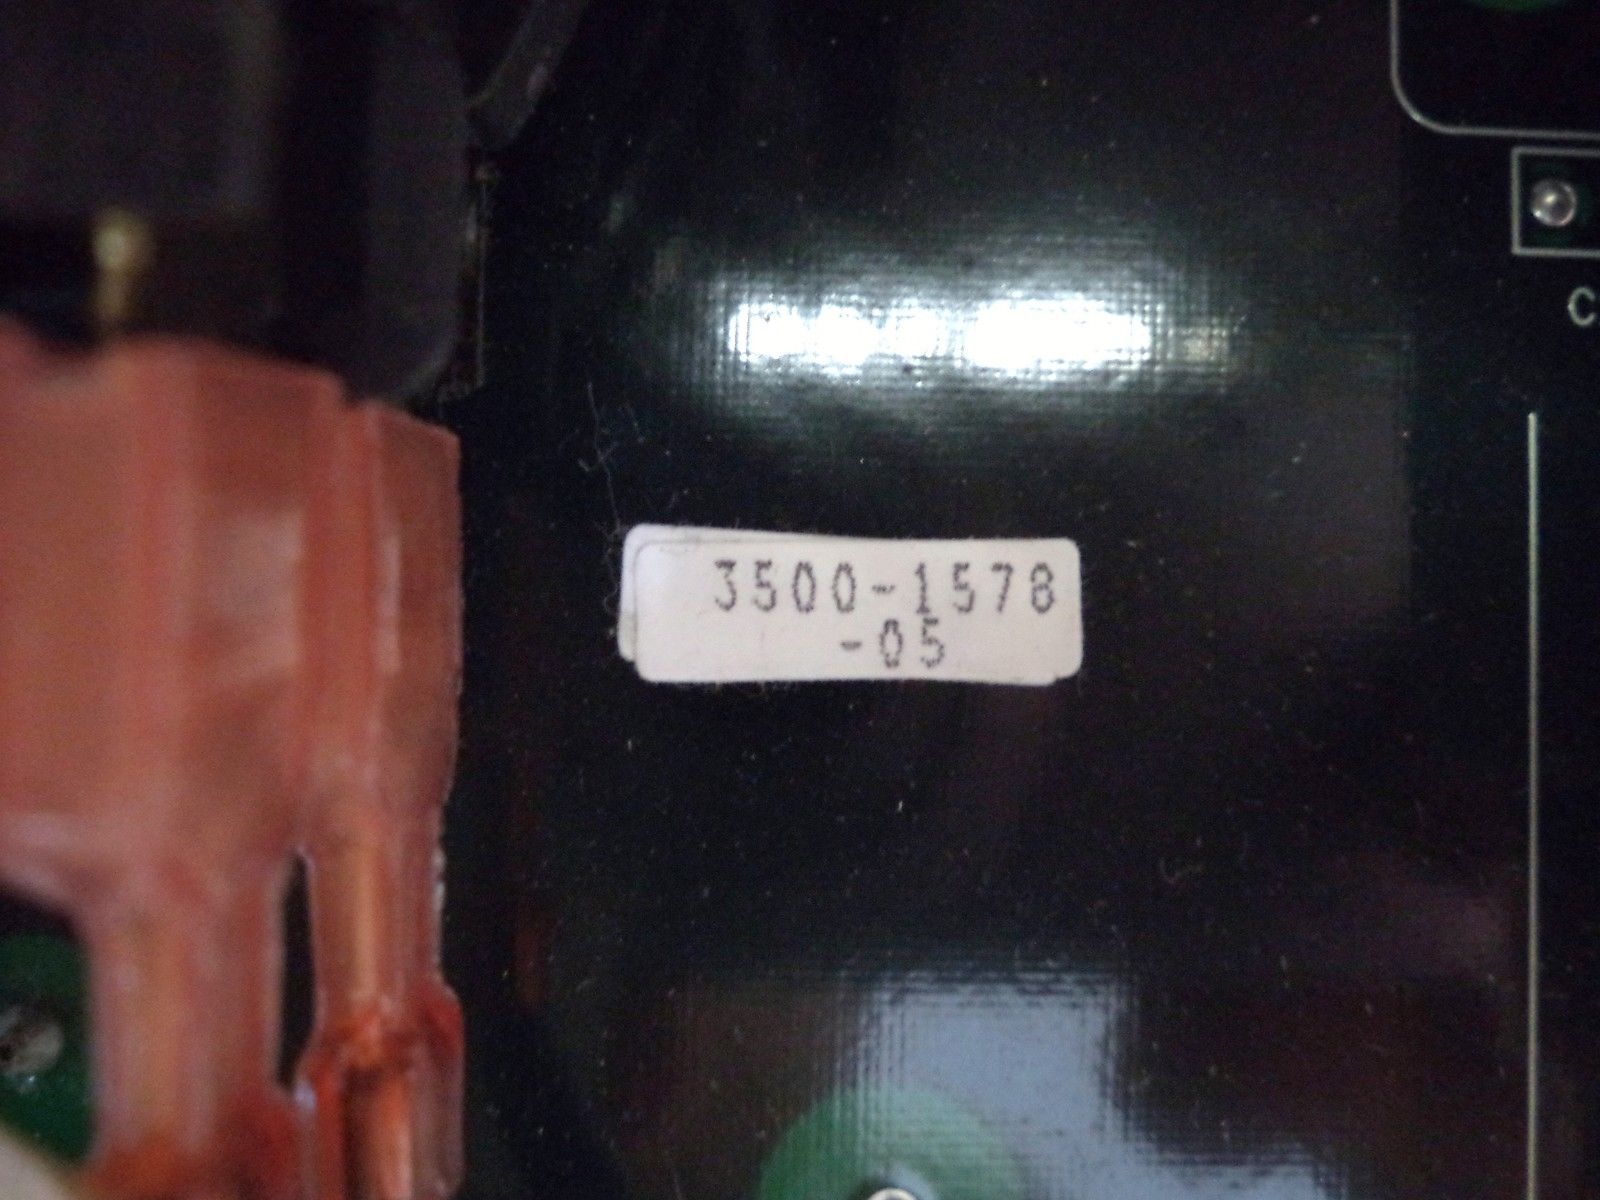 a close up of a label on a machine